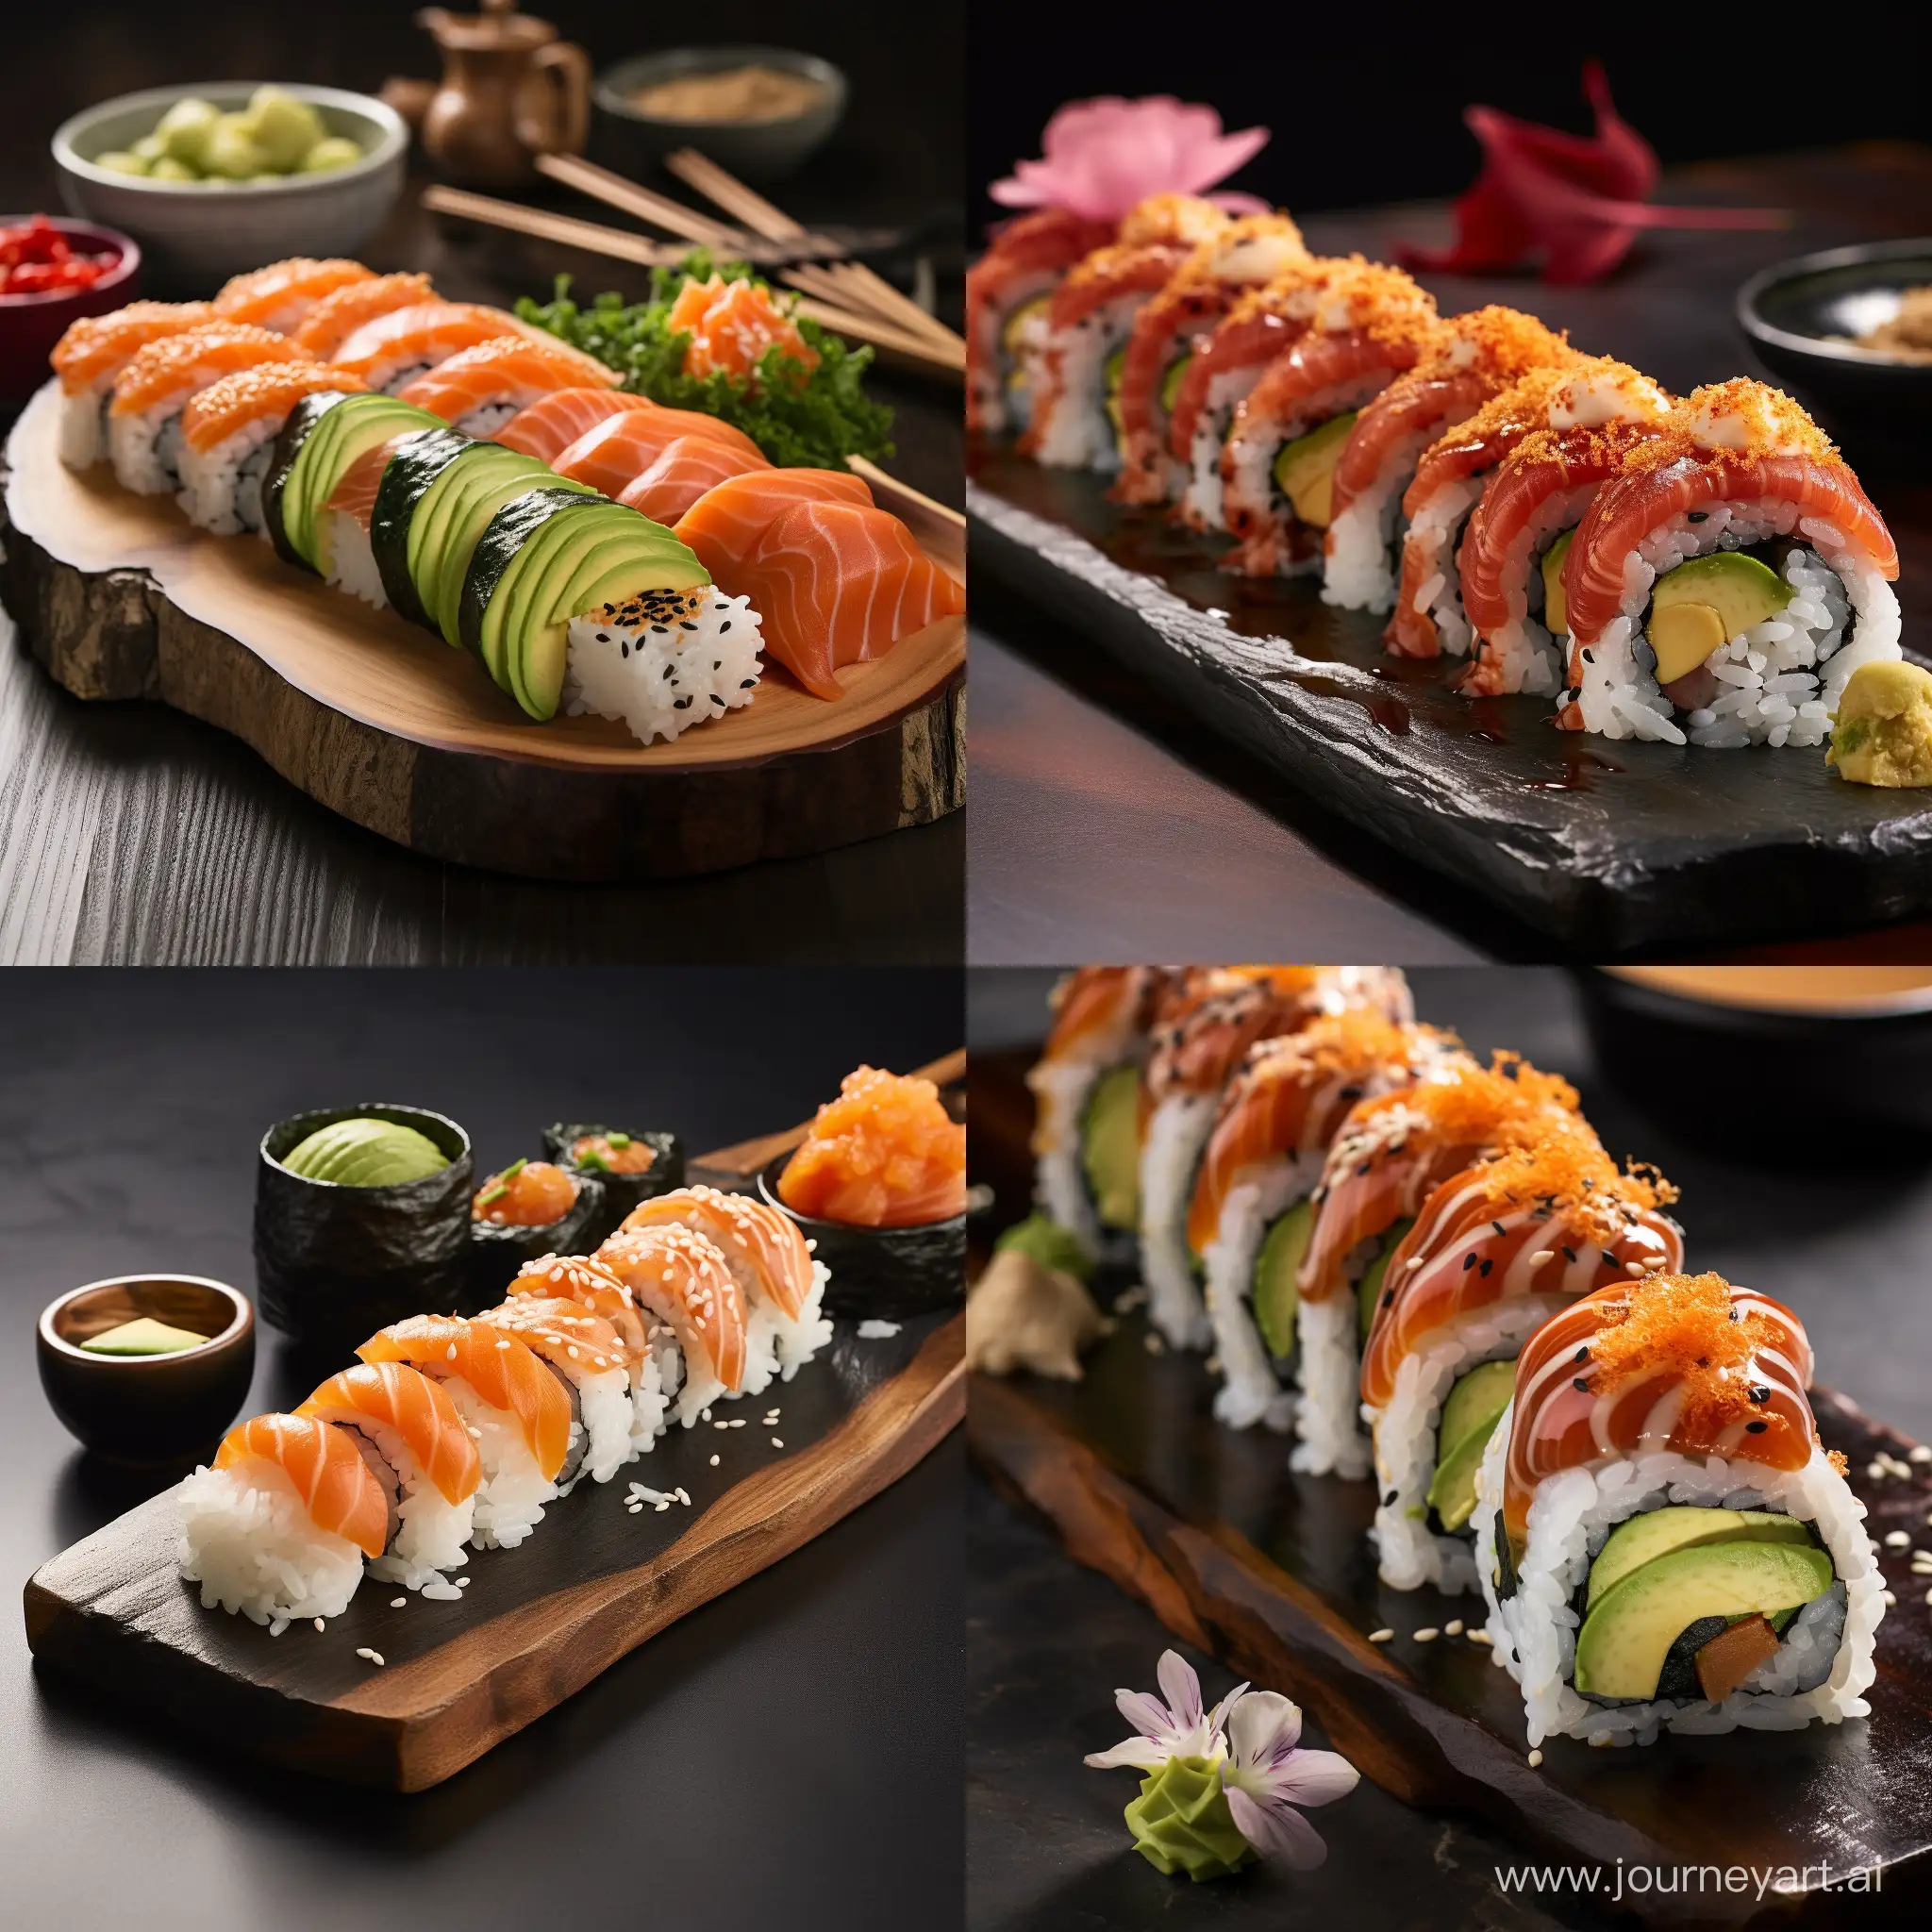 /image Gourmet sushi with our comprehensive guide on crafting the perfect Truffle-Infused Salmon and Avocado Sushi Rolls. Elevate your culinary skills and experience the magic of real truffles blending seamlessly with premium salmon and creamy avocado.